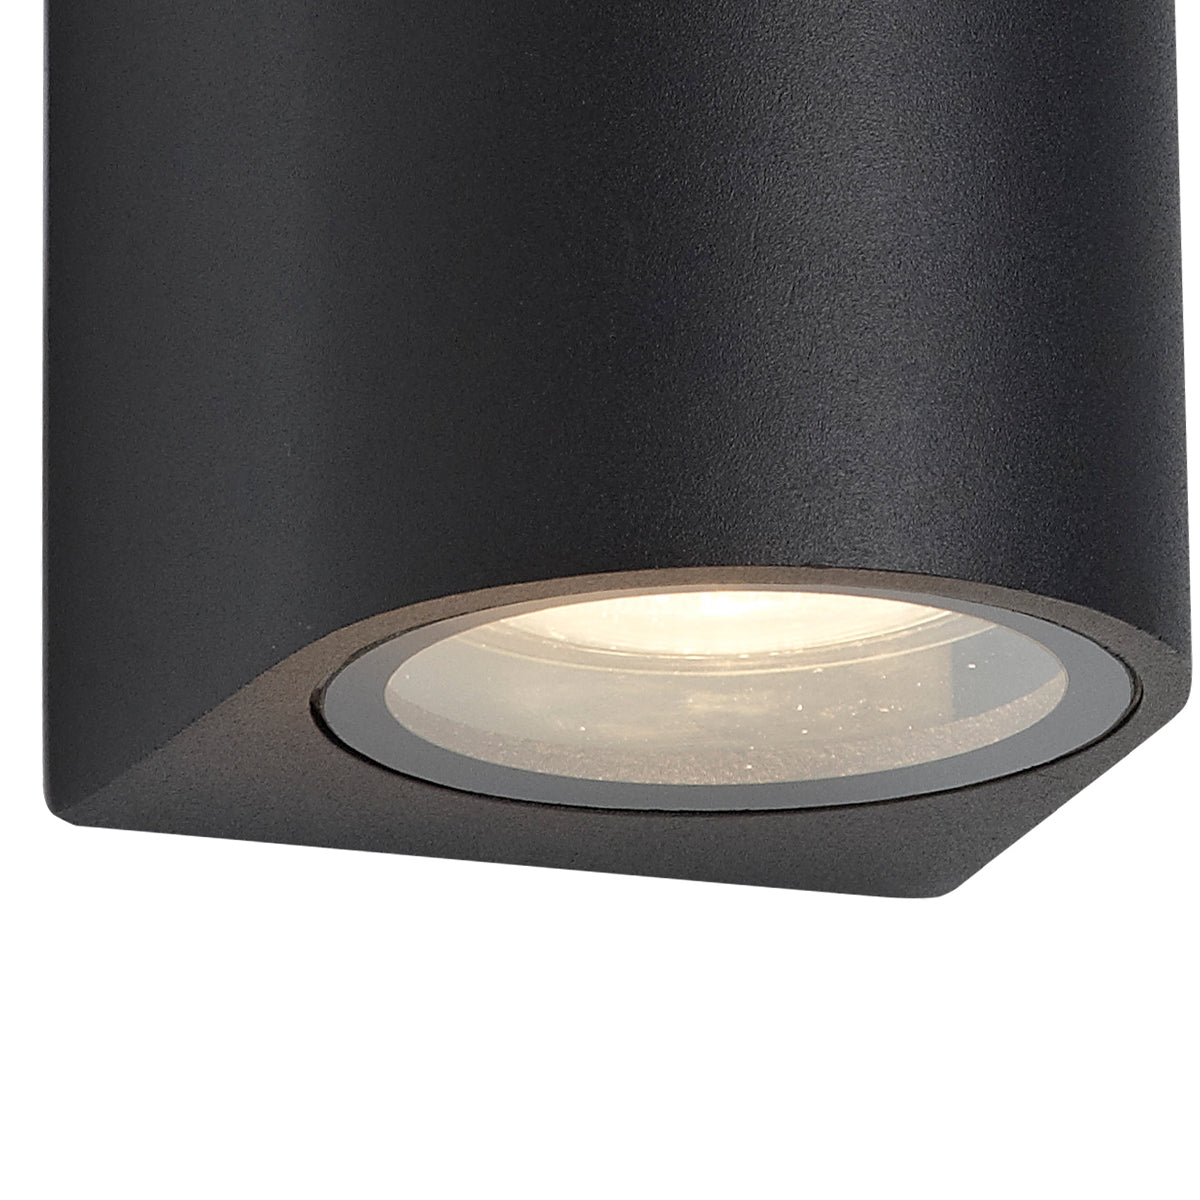 Our Eileen black wall mounted curved double outdoor spotlight light would look perfect in a modern or more traditional home design. Outside wall lights can provide atmospheric light in your garden, at the front door or on the terrace as well as a great security solution. It is designed for durability and longevity with its robust material producing a fully weatherproof and water resistant light fitting.